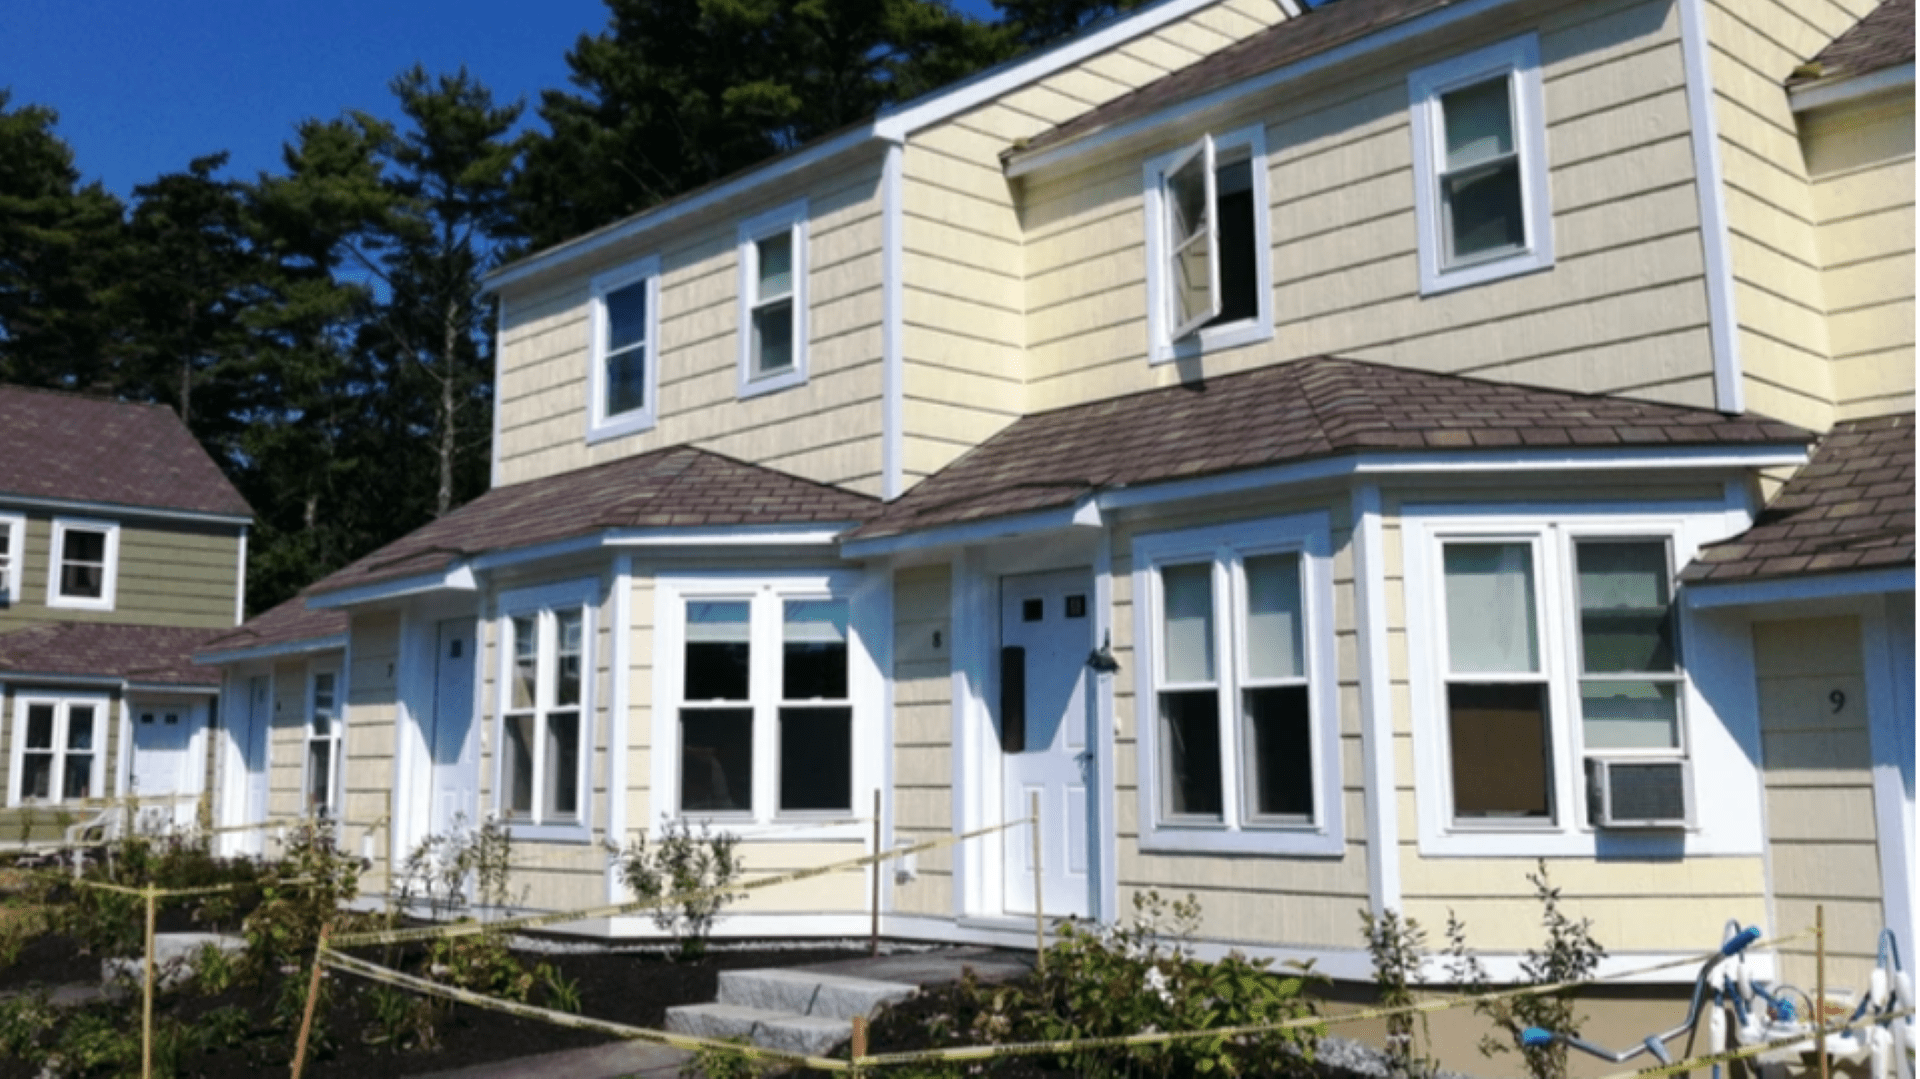 Legislators address Maine’s housing shortage, but advocates say so much more needs to be done